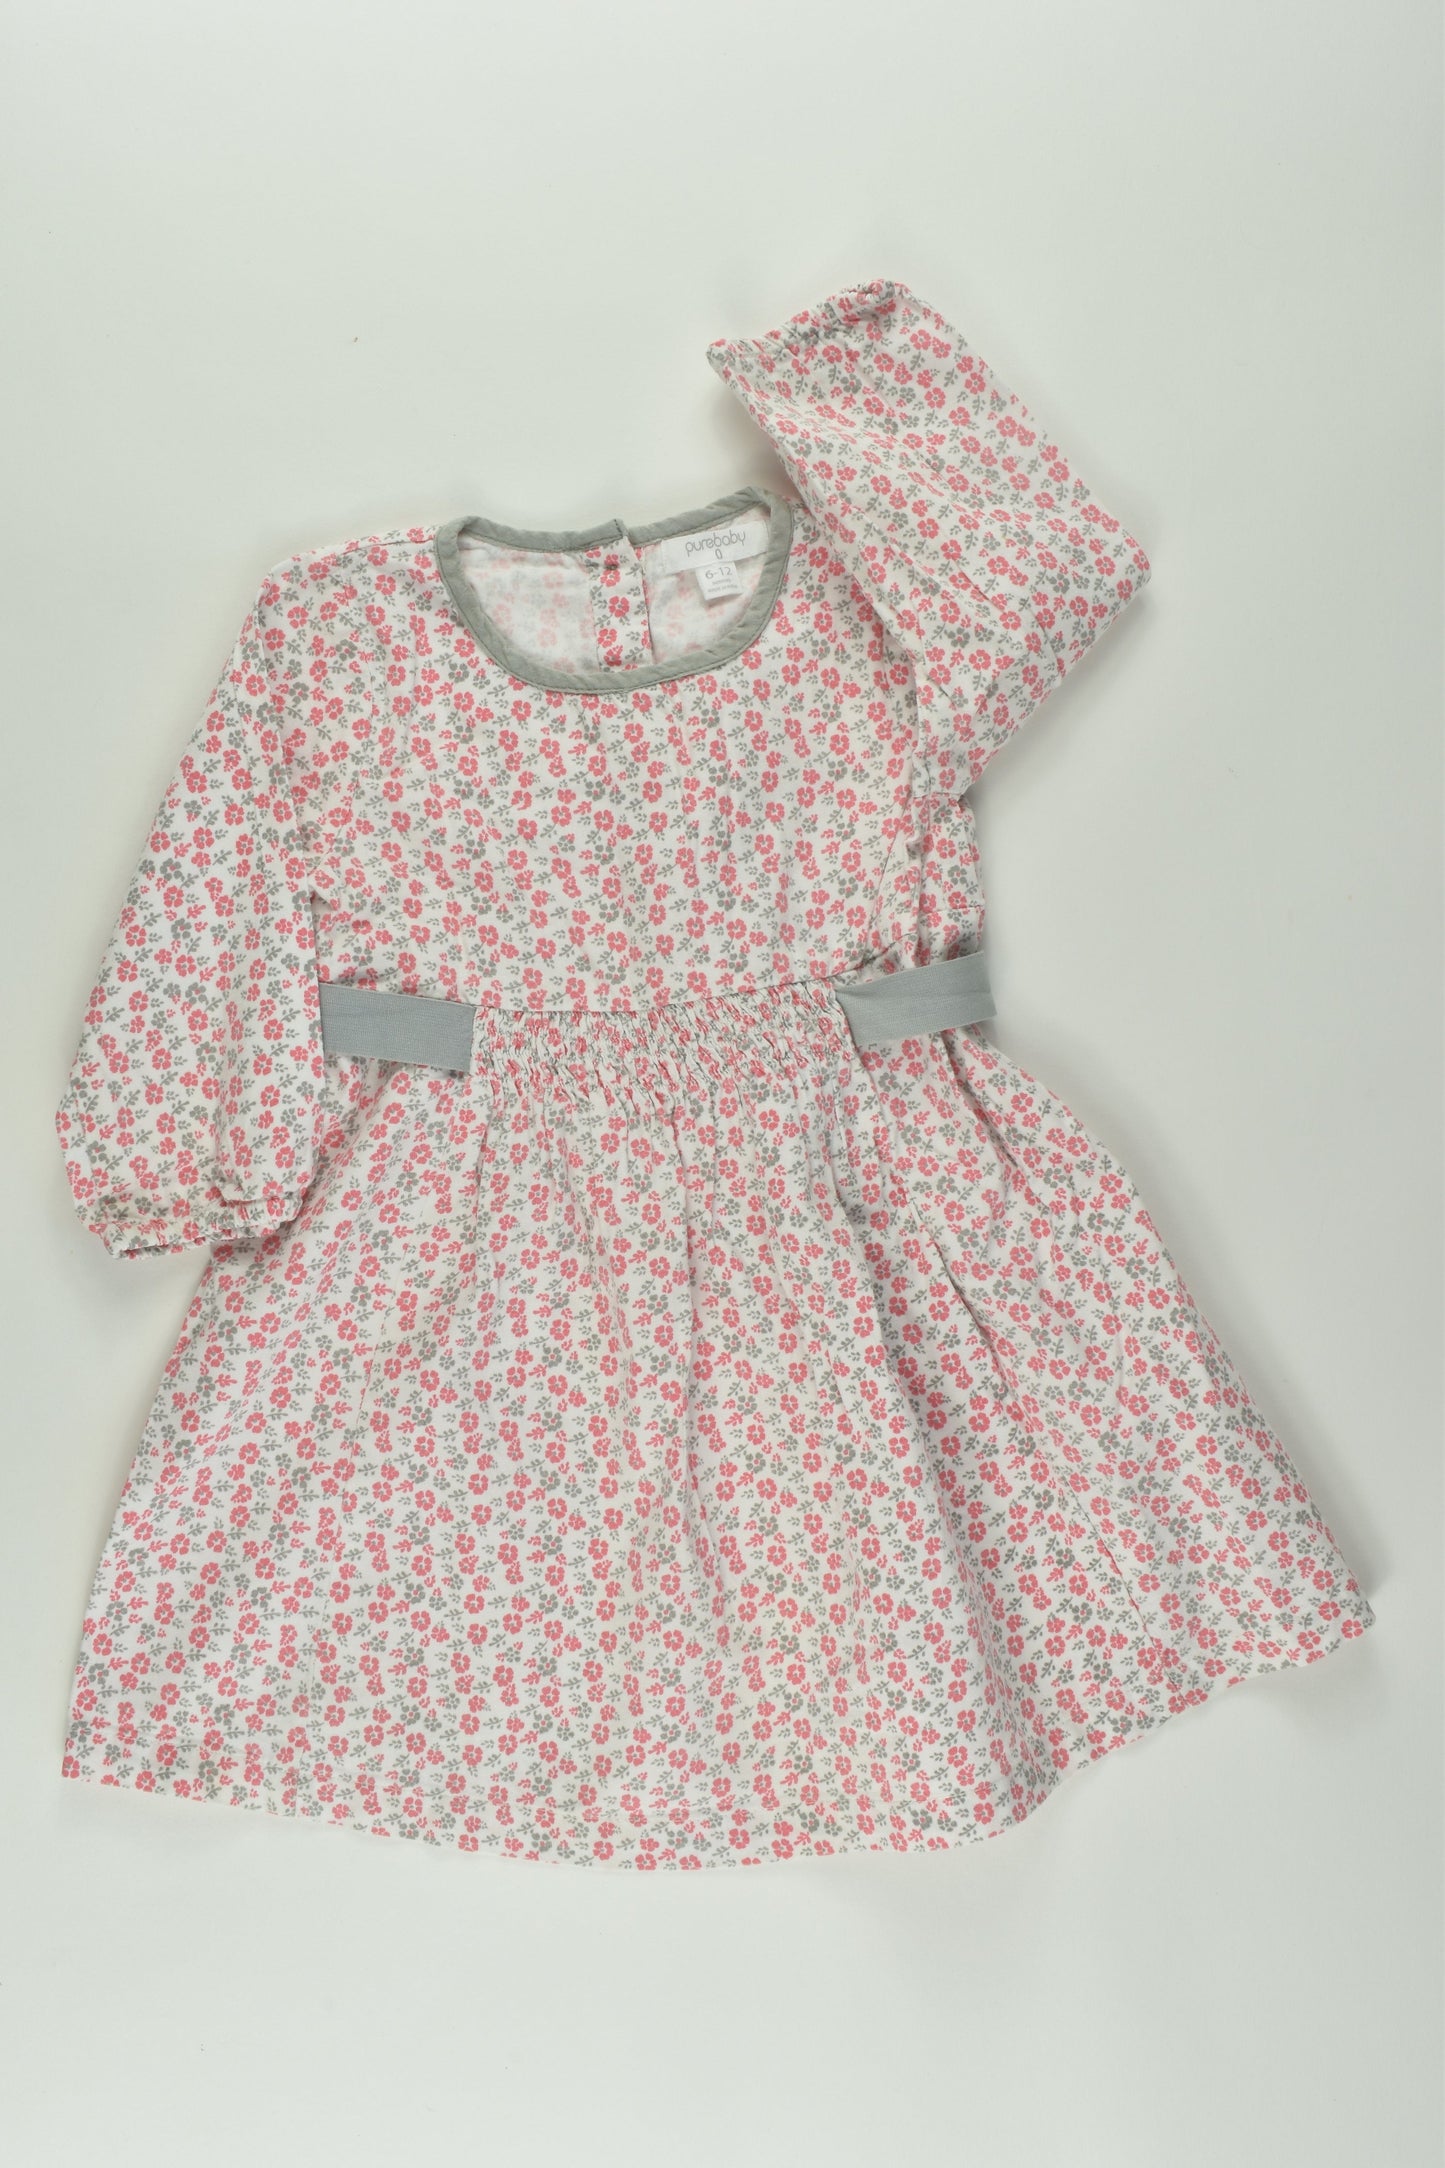 Purebaby Size 0 Floral Dress